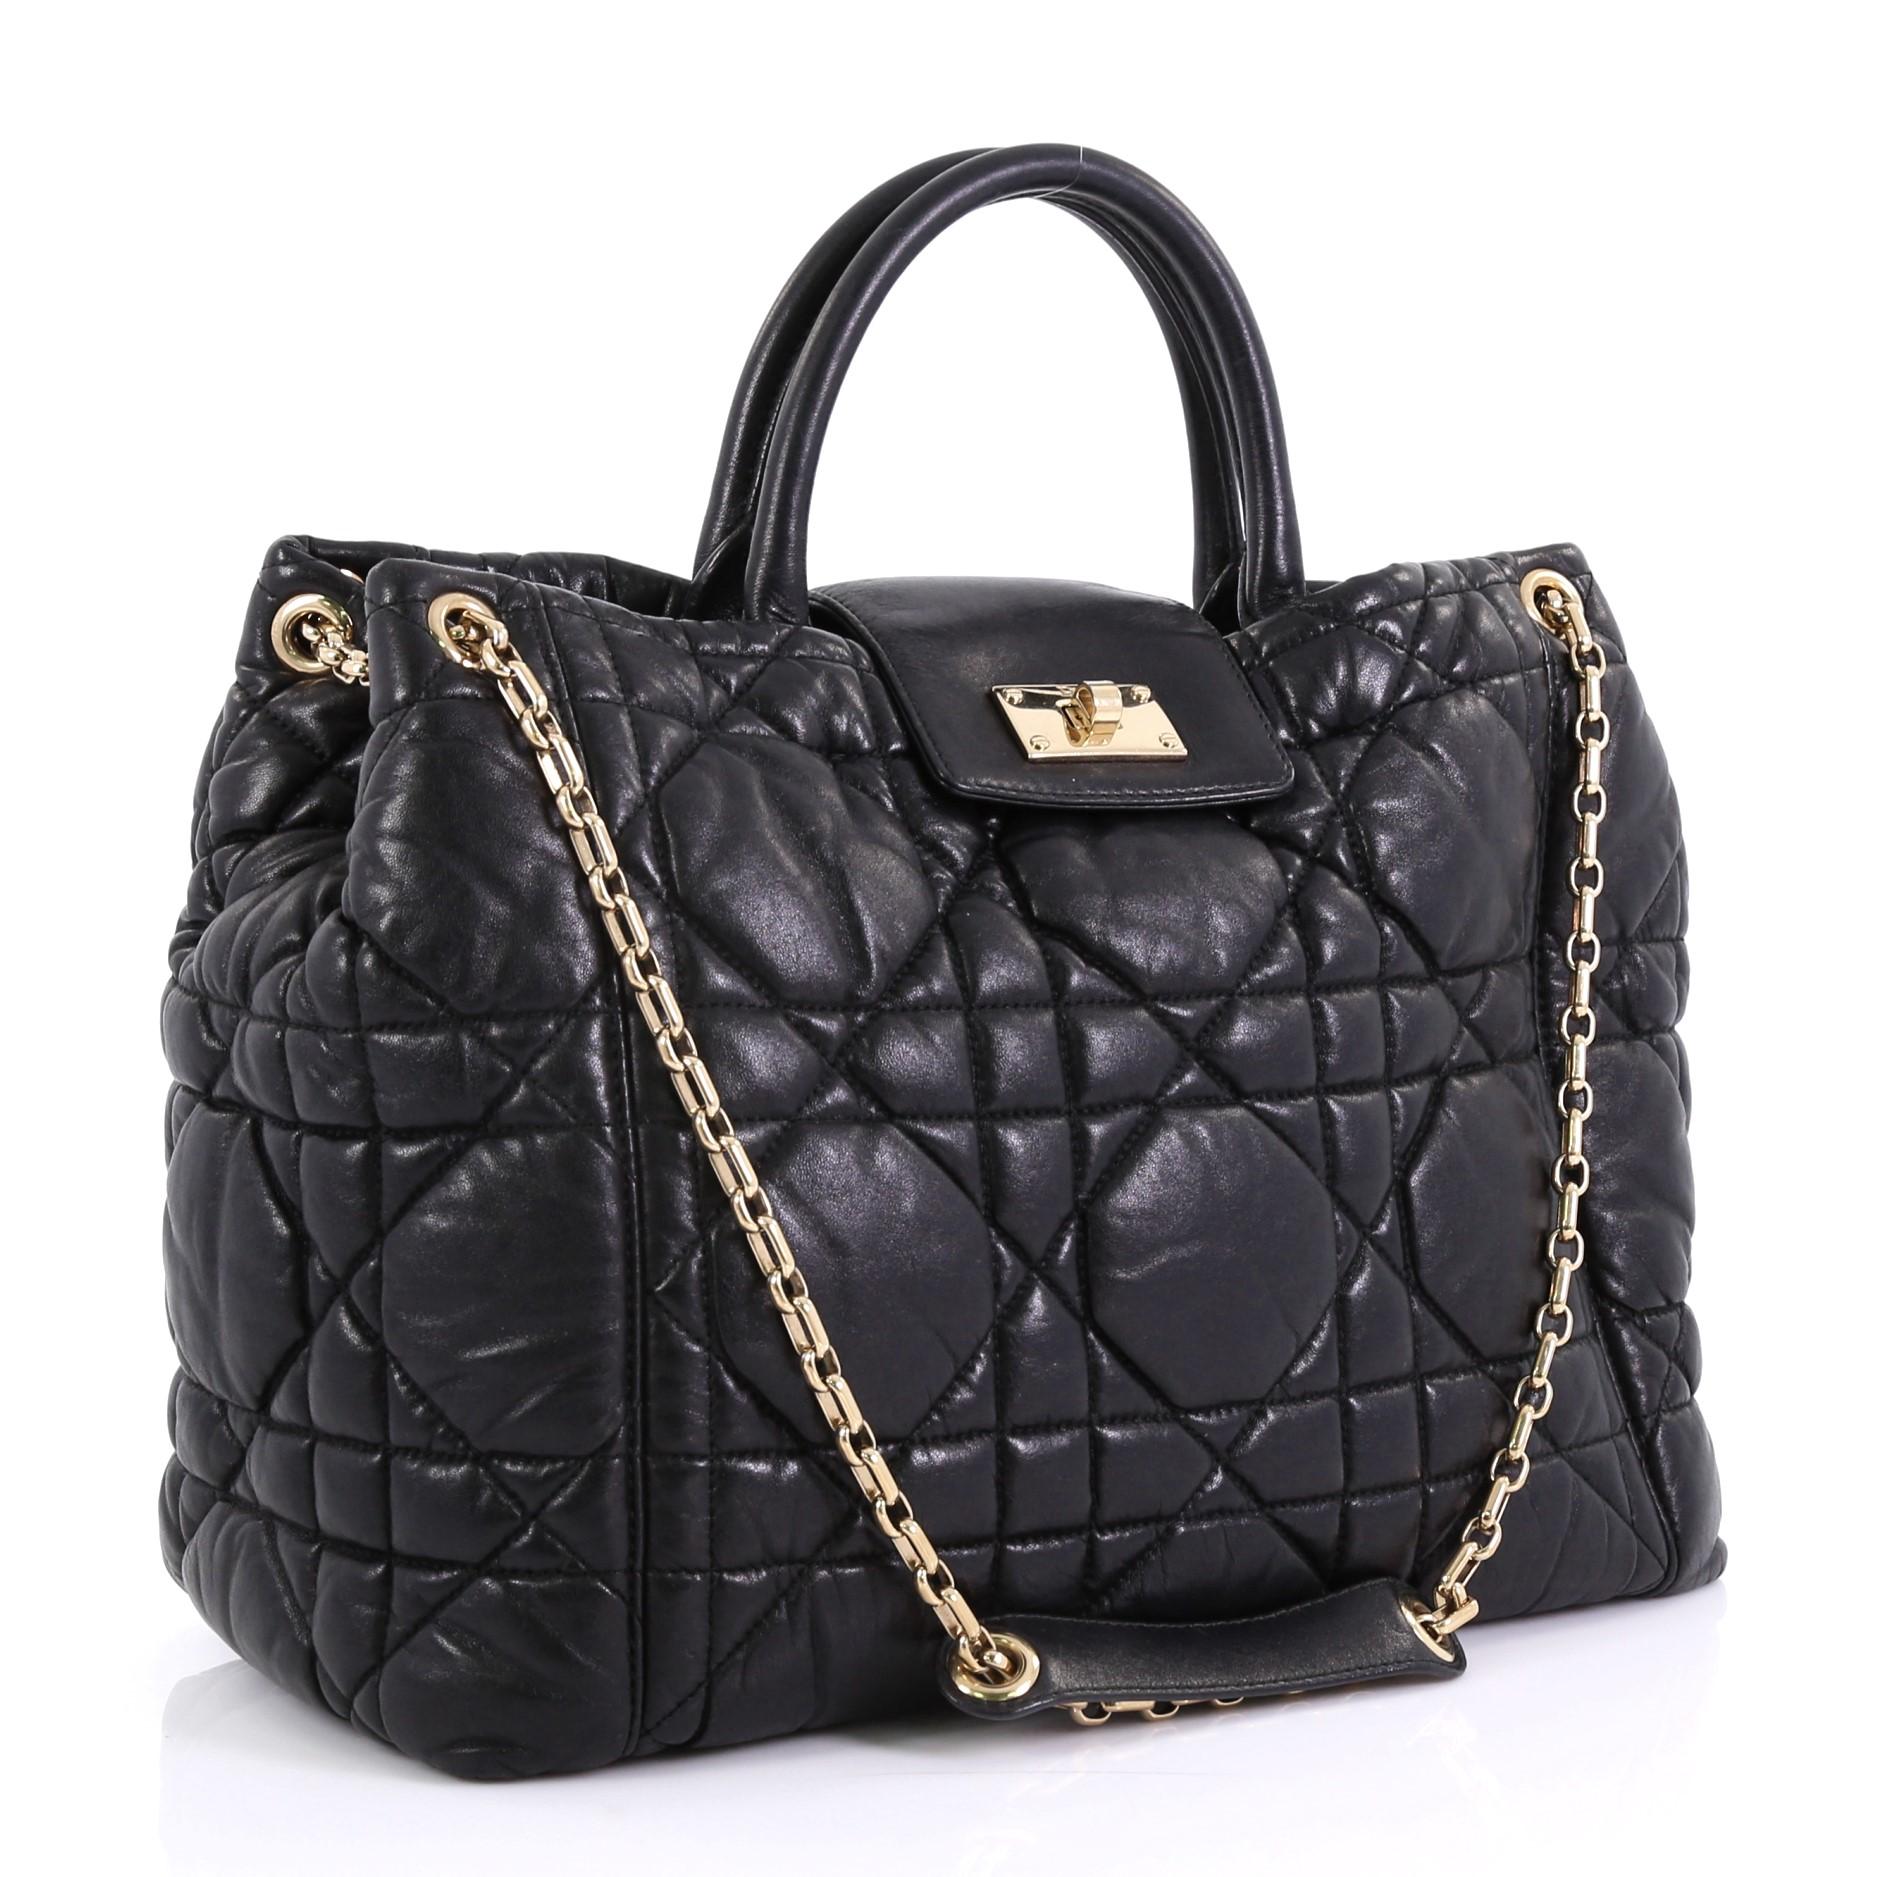 This Christian Dior Milly La Foret Shopping Tote Cannage Quilt Lambskin Large, crafted in black quilted lambskin leather, features dual-rolled leather handles, chain-link shoulder straps with leather pad, and gold-tone hardware. Its flap tab with